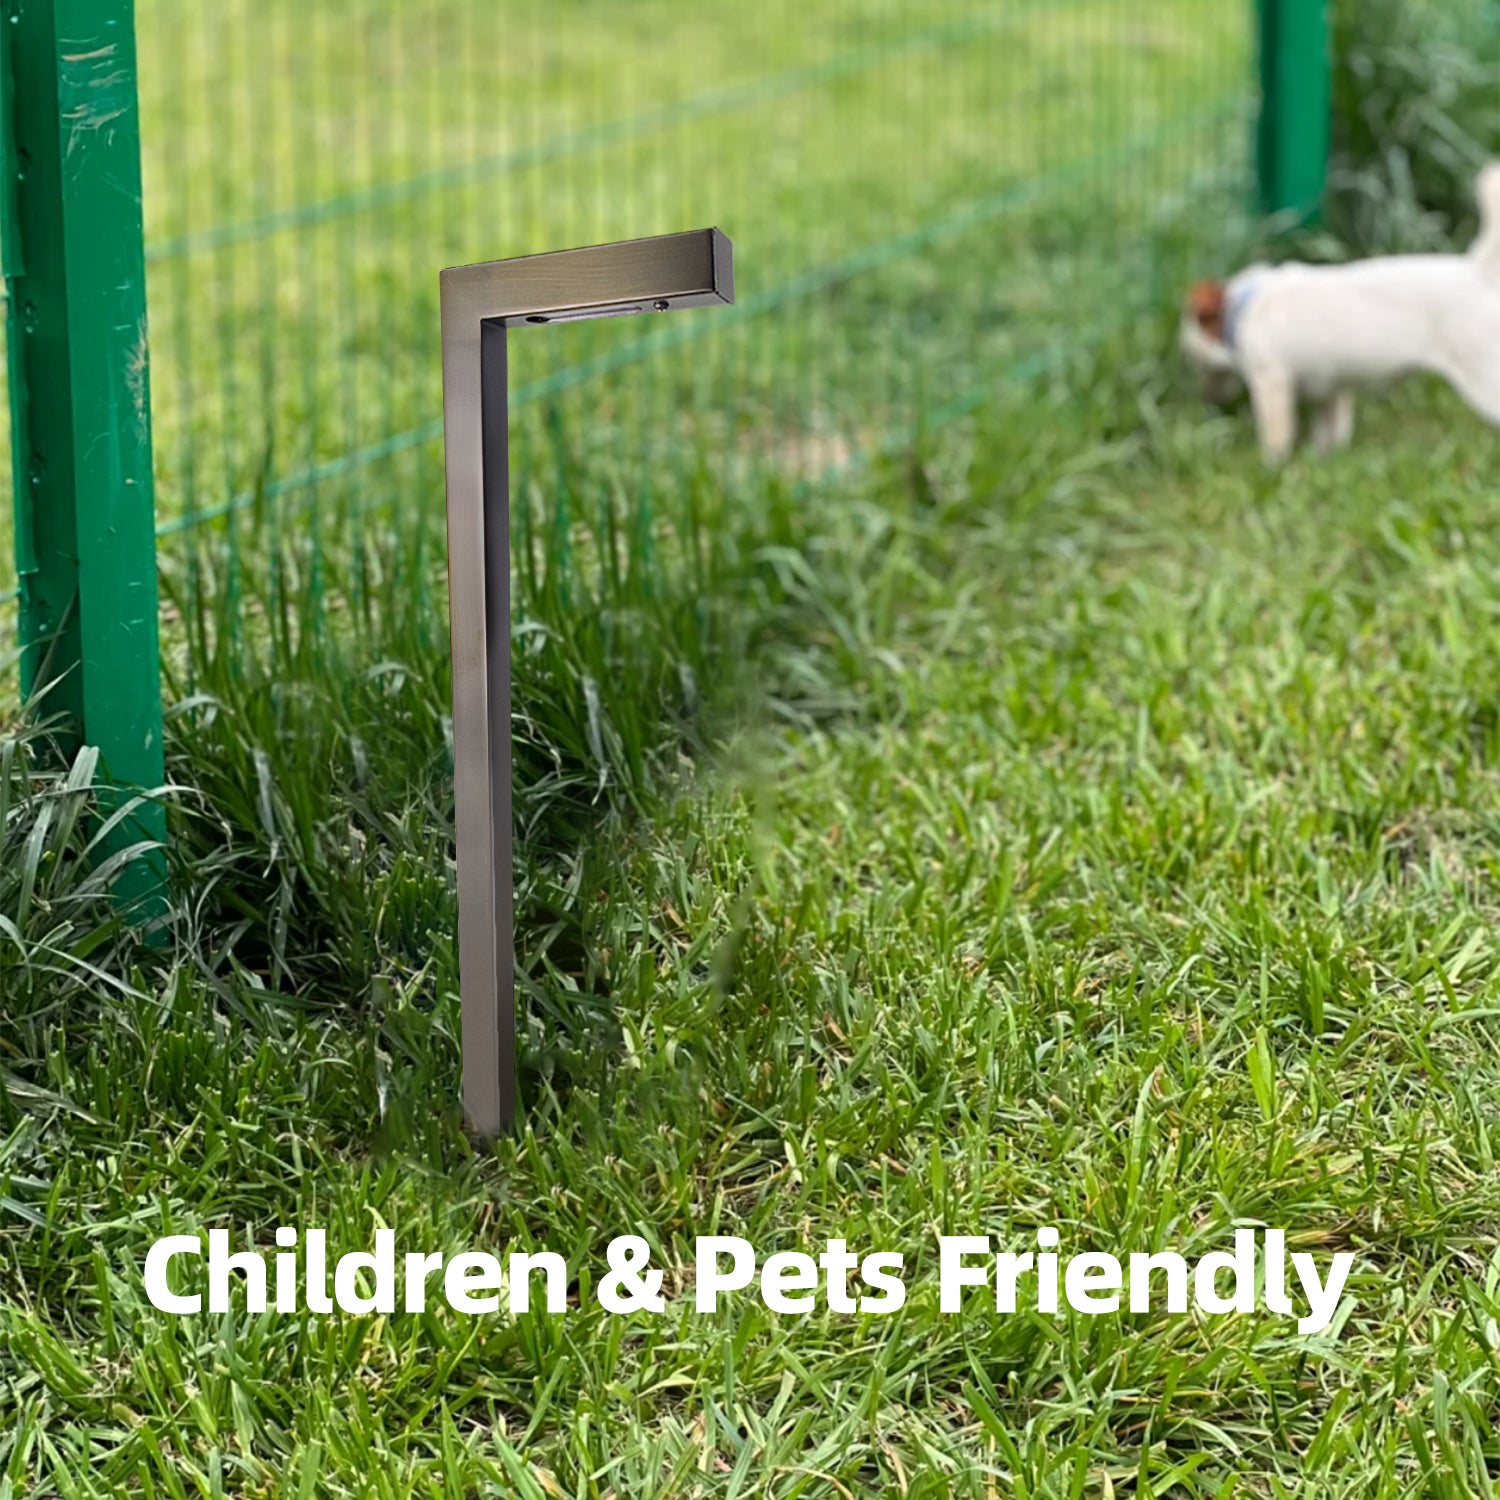 L-shaped brass outdoor path light installed on grassy area near green fence, with text 'Children & Pets Friendly' indicating safe for children and pets, dog in the background.